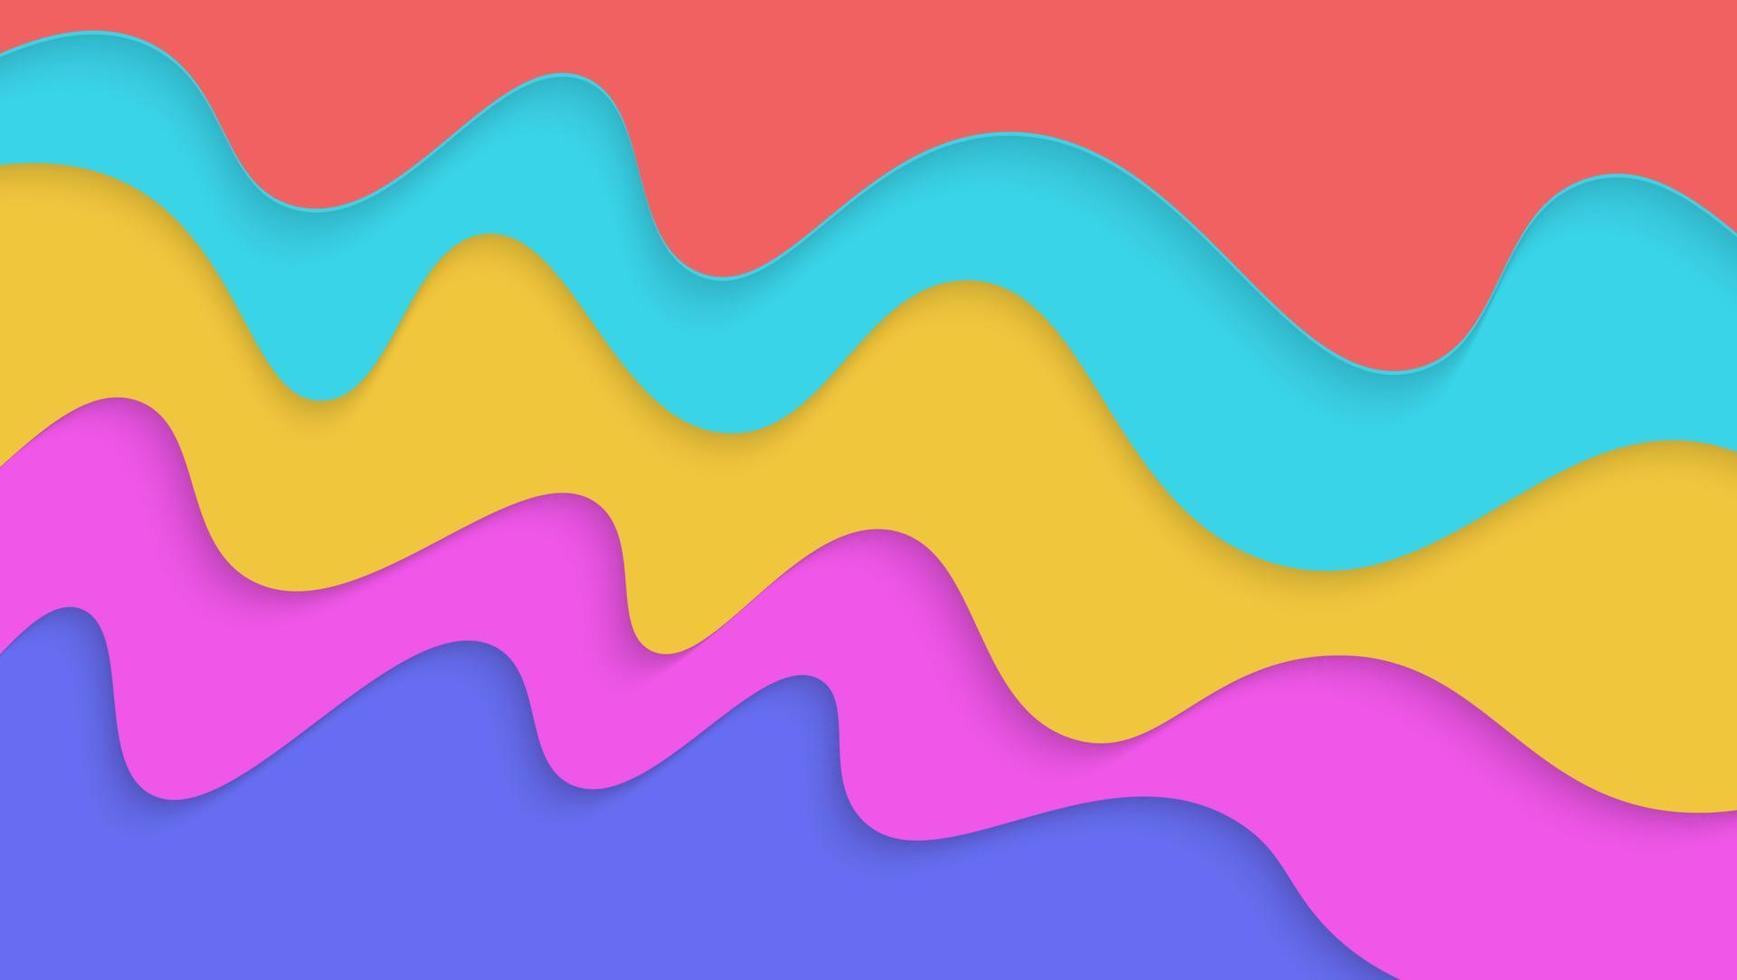 Modern Abstract Colorful Waves Shape Papercut Style Background vector